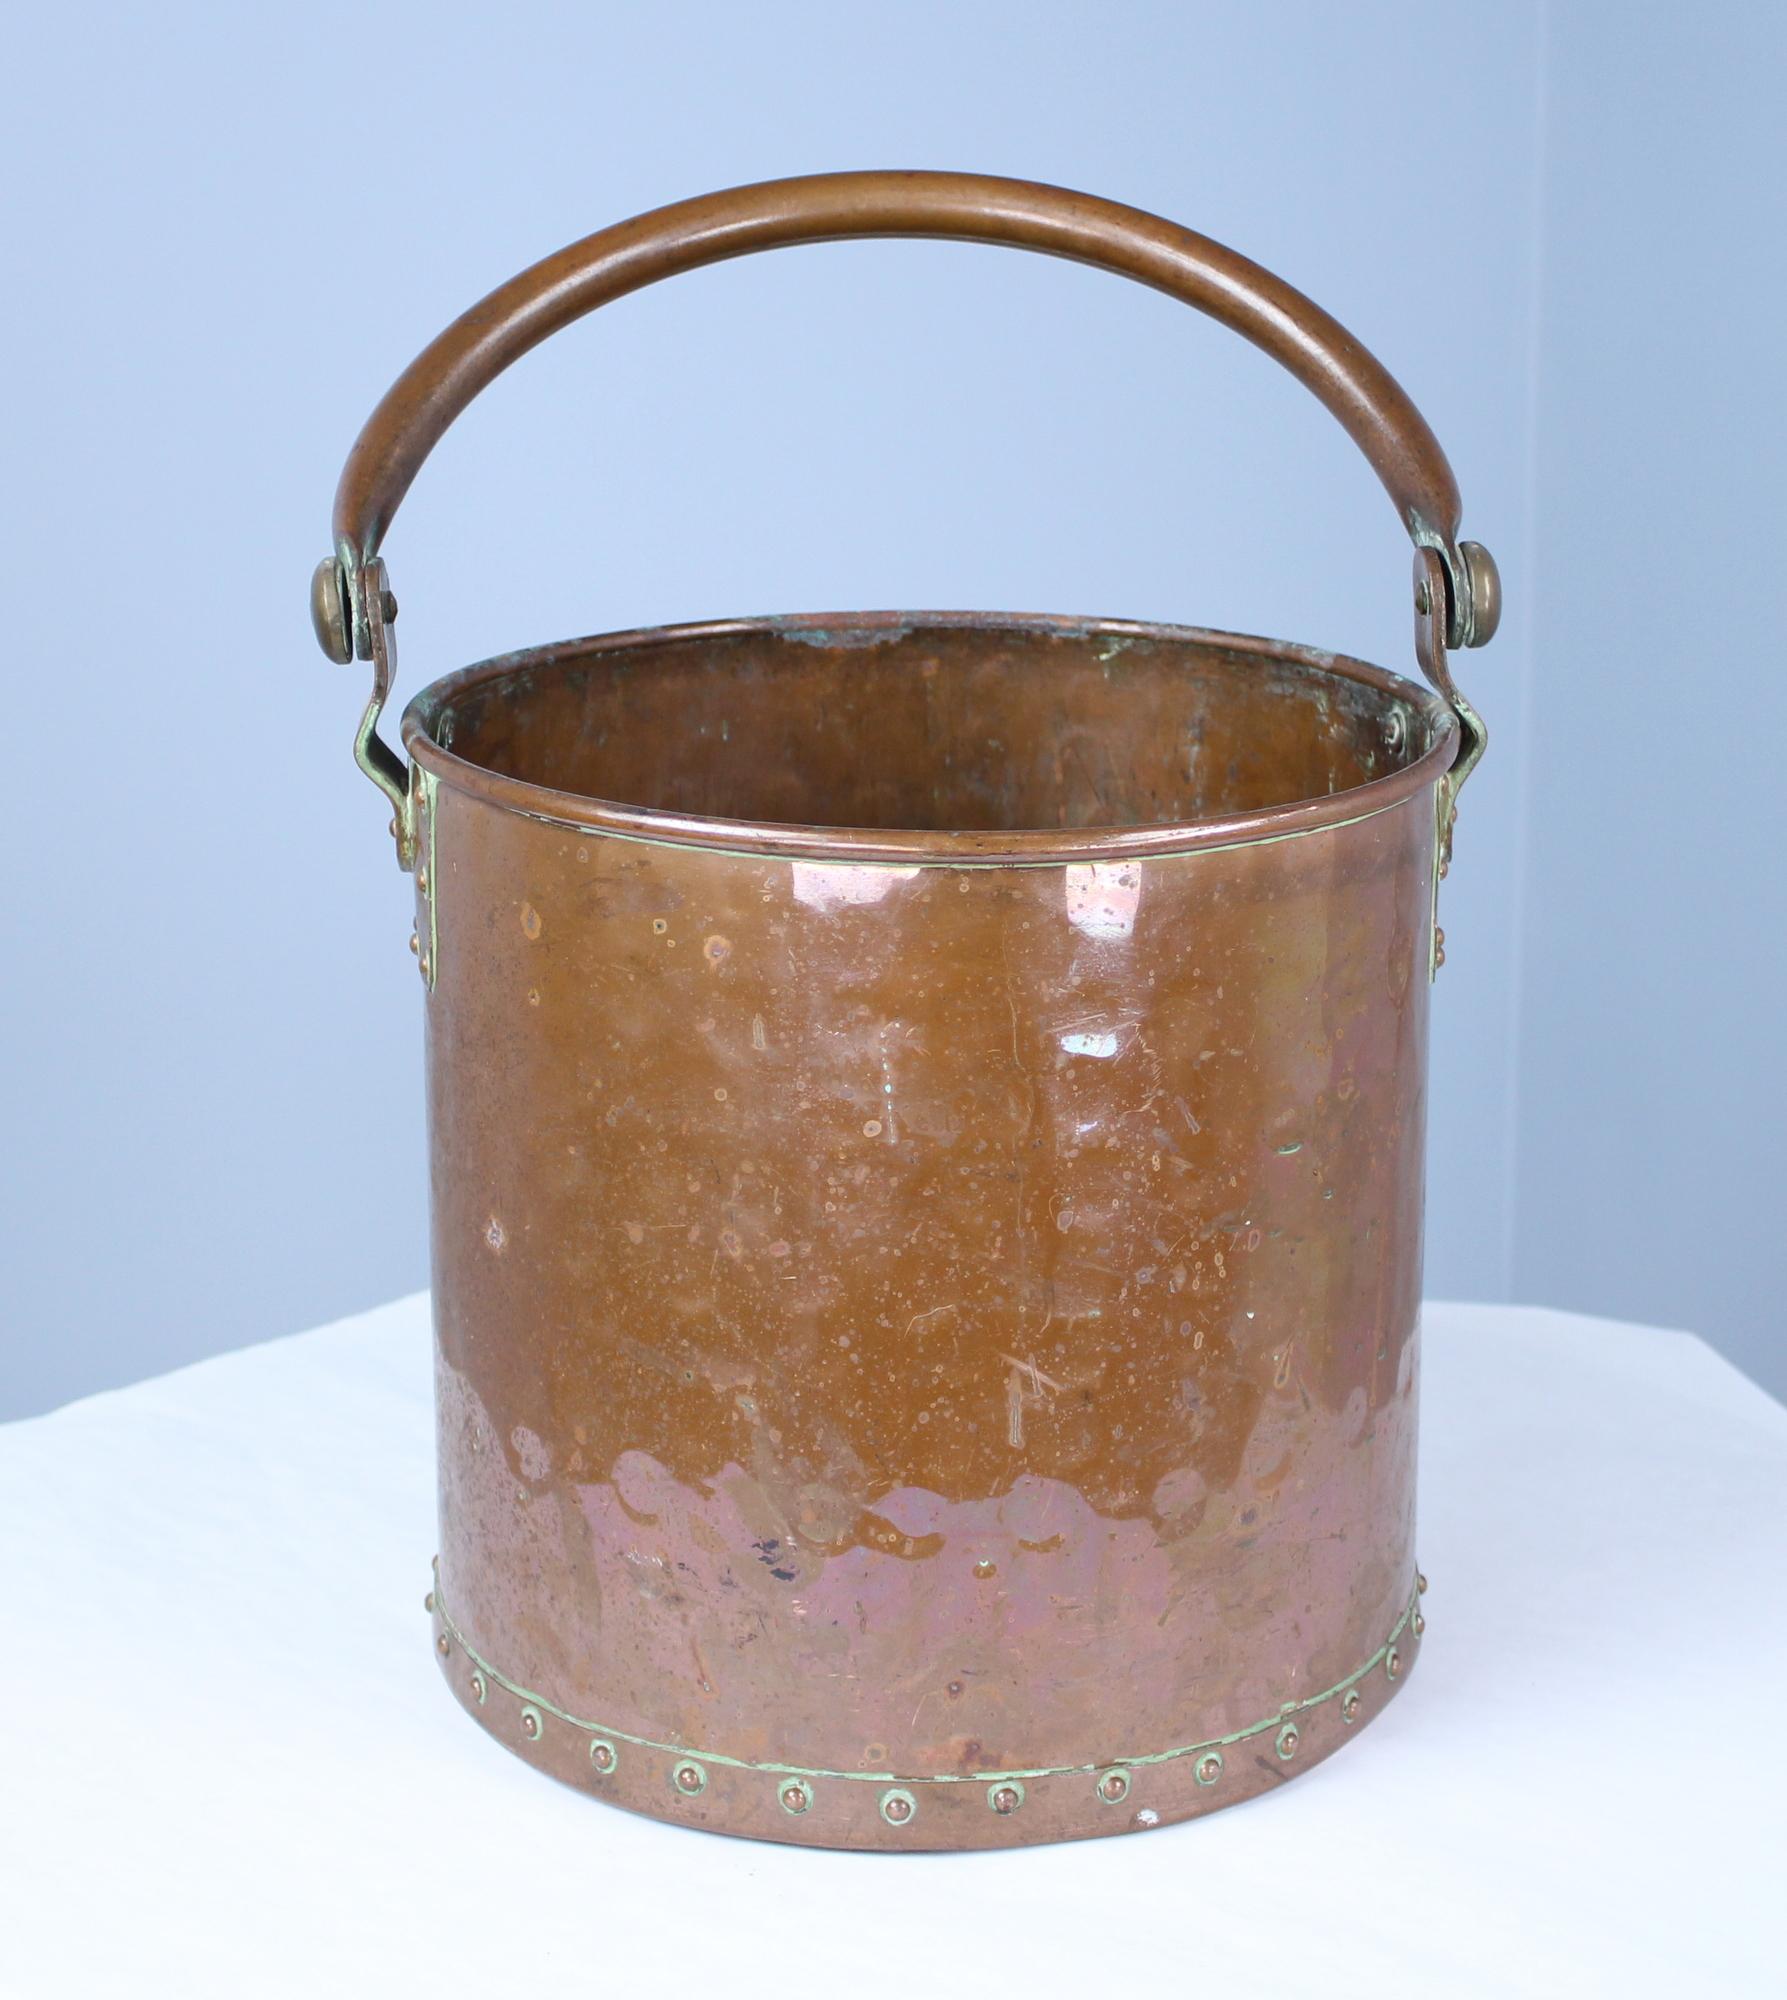 A wonderfully thick and heavy copper log bin or pail from late 19th century, England. We love the studs around the bottom! Height measurement is for the bin without the handle.